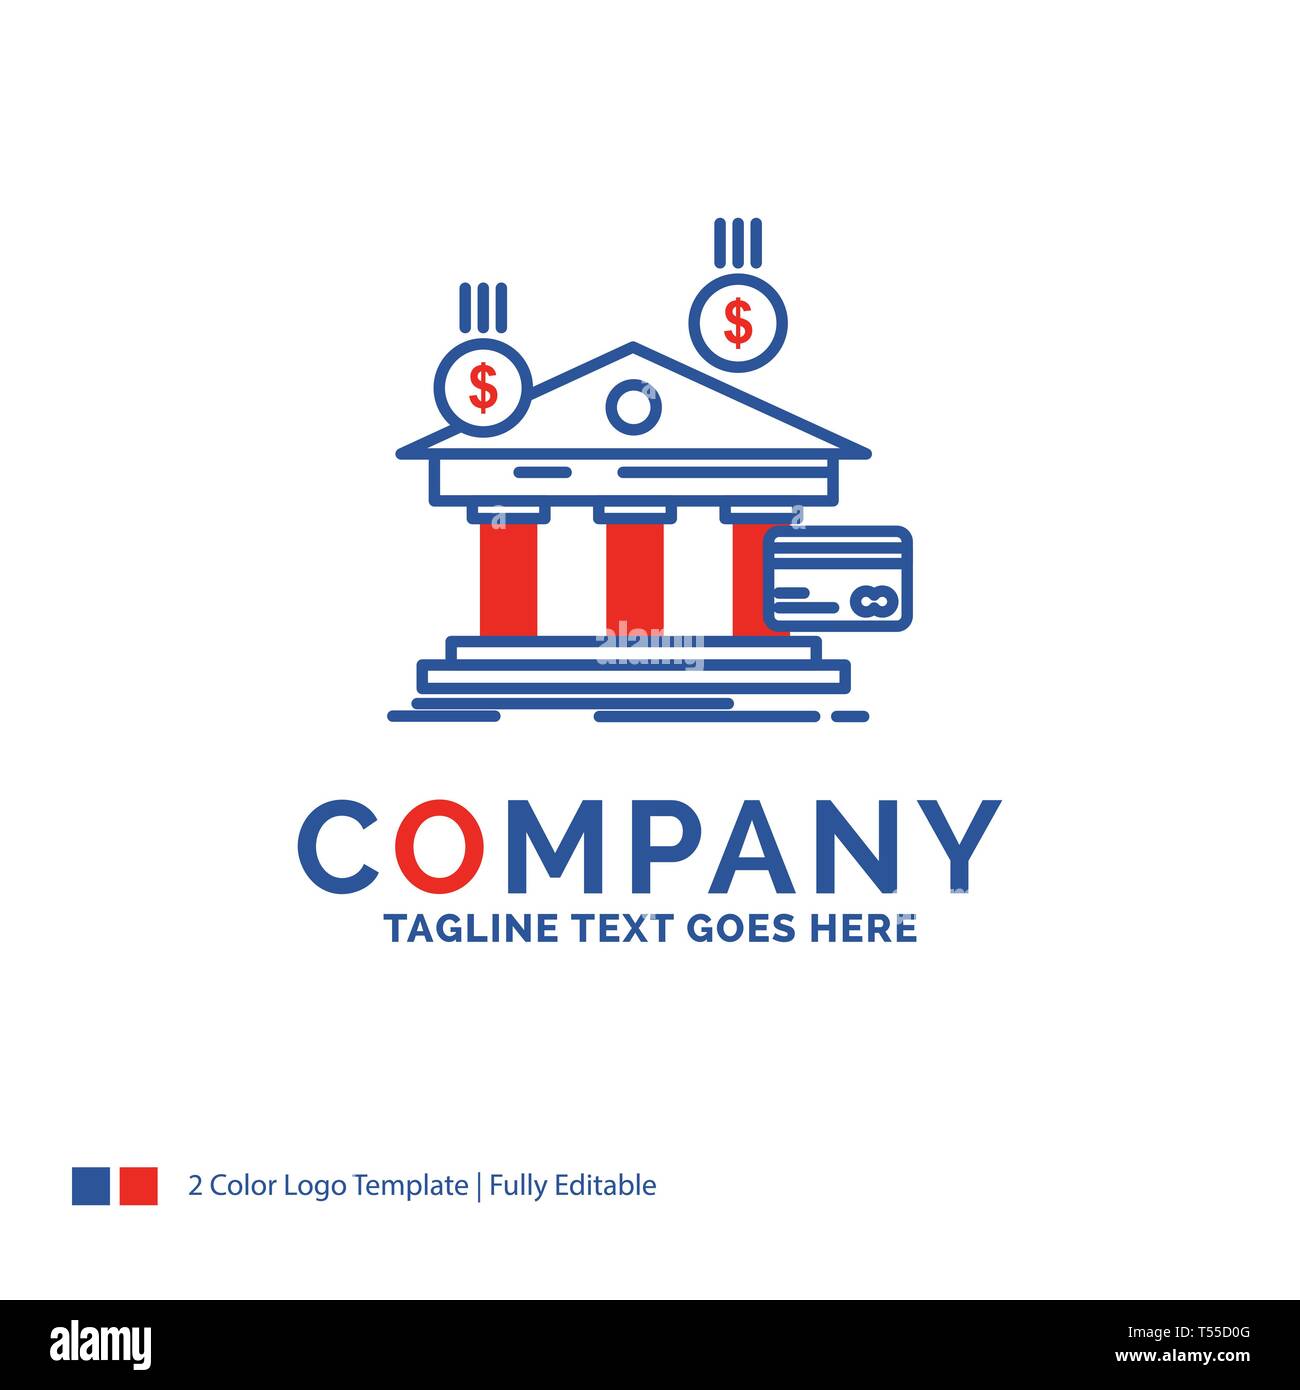 https://c8.alamy.com/comp/T55D0G/company-name-logo-design-for-bank-payments-banking-financial-money-blue-and-red-brand-name-design-with-place-for-tagline-abstract-creative-logo-T55D0G.jpg